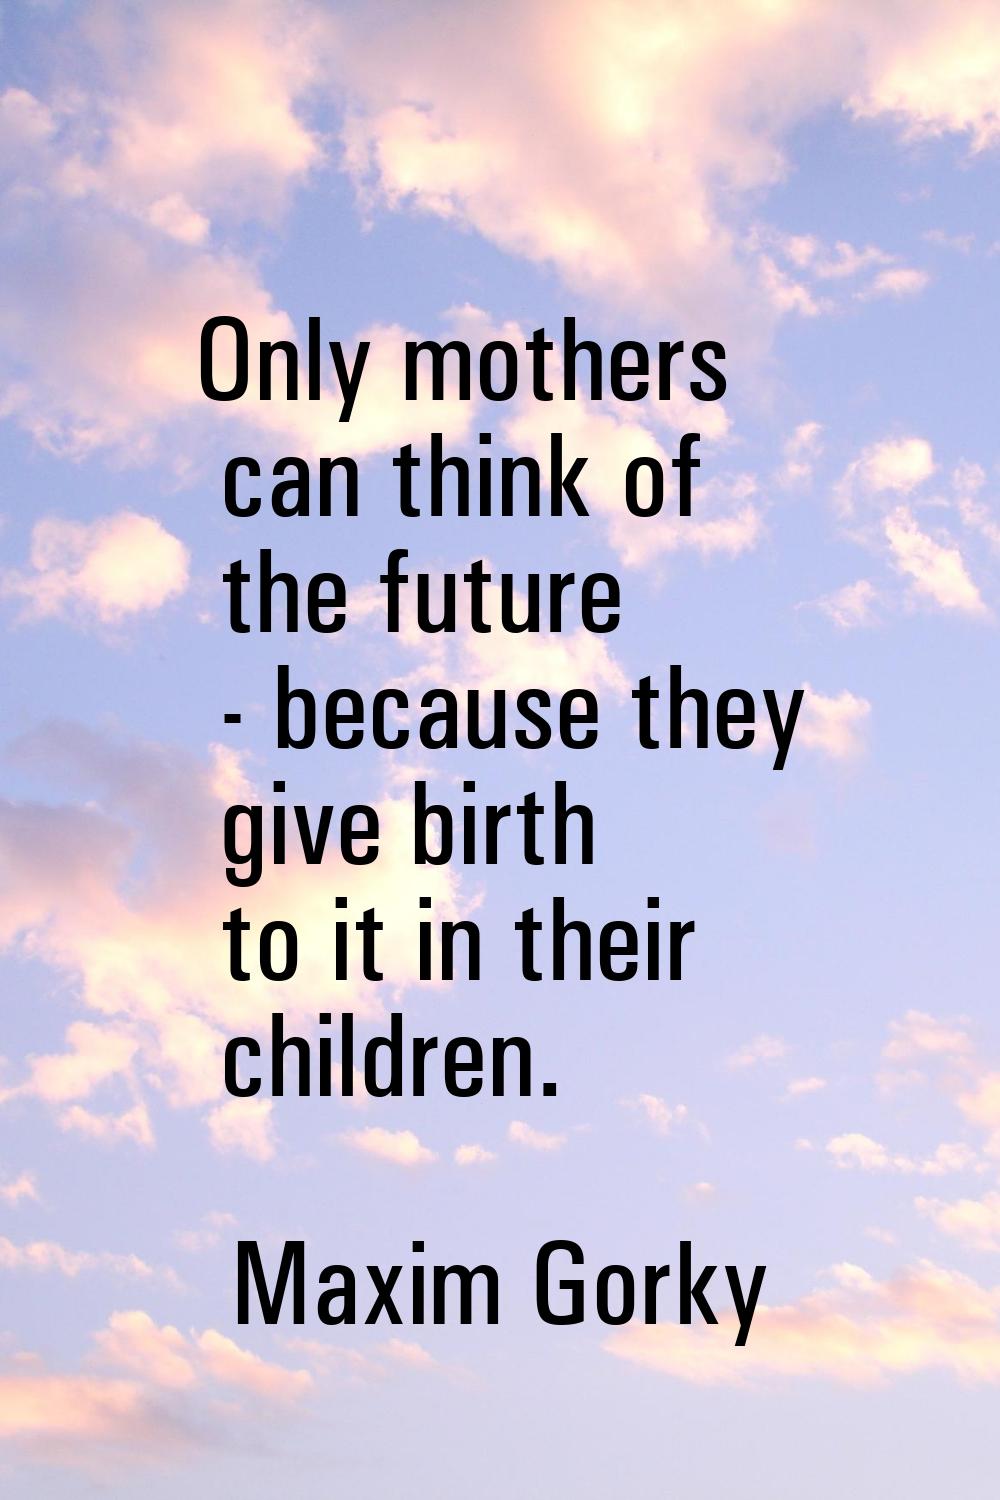 Only mothers can think of the future - because they give birth to it in their children.